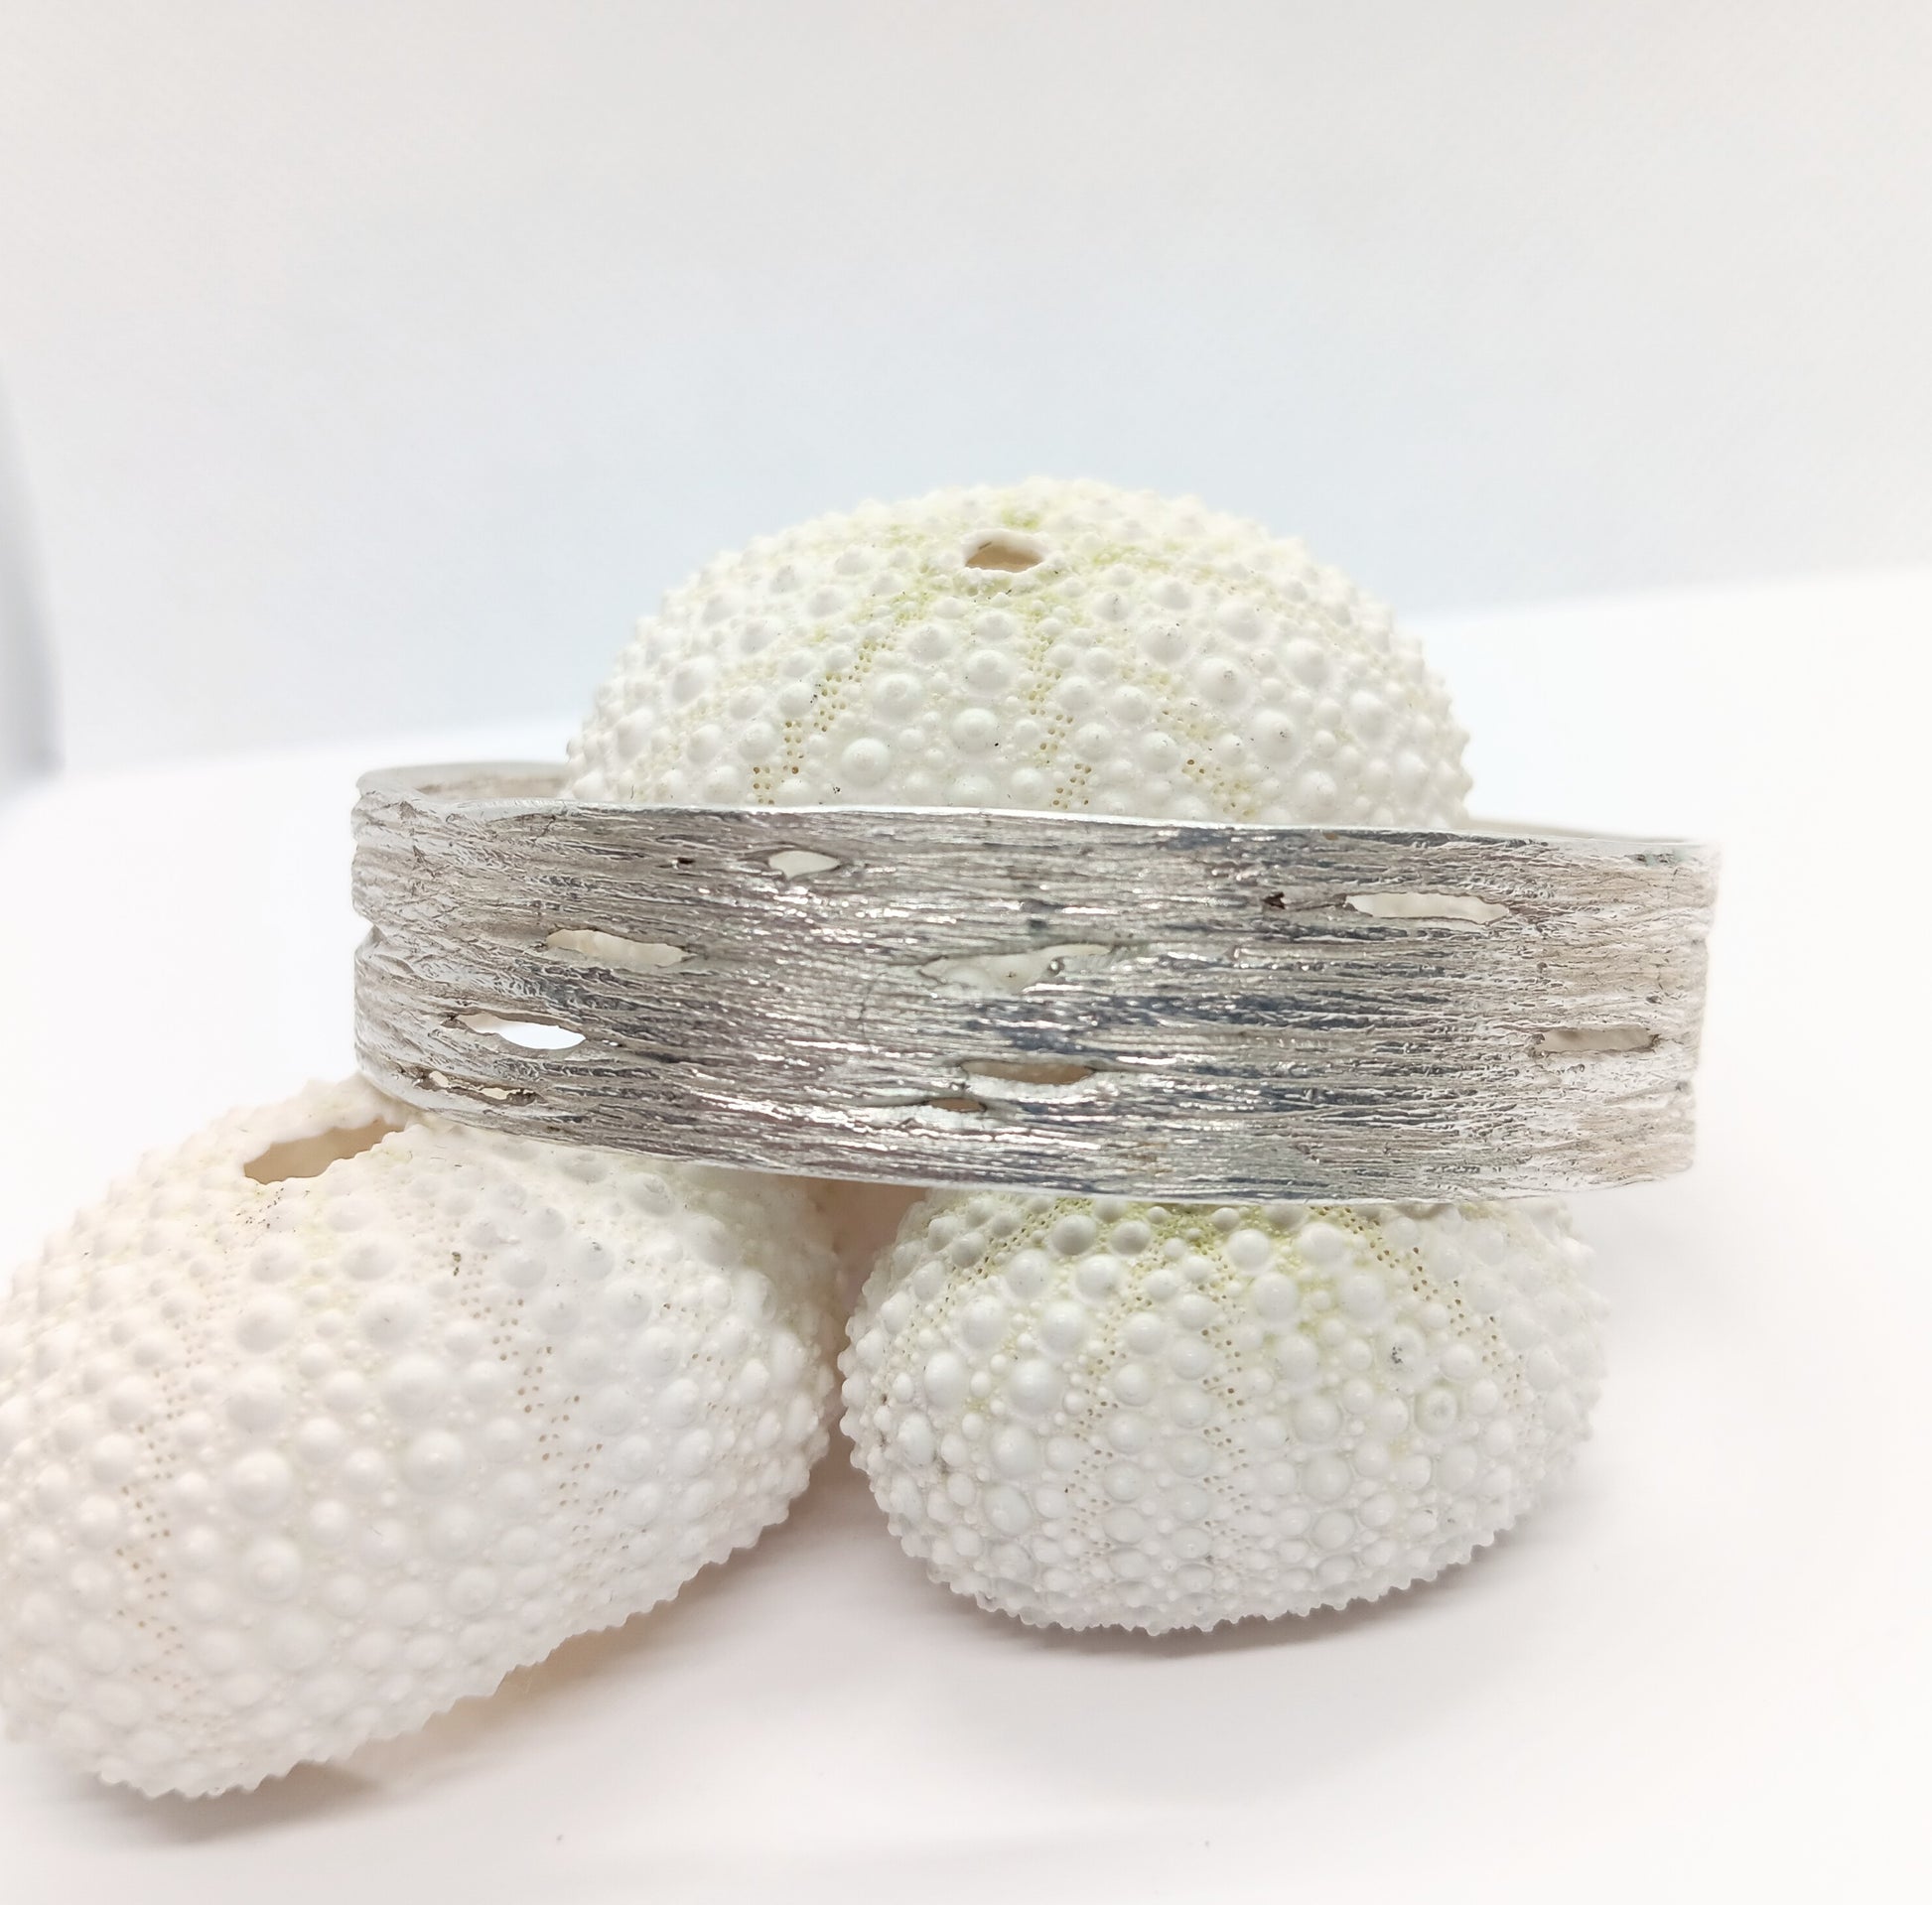 Birch bark striations and horizontal pores (lenticels) are visible on this finely crafted sterling silver bangle cast from nature